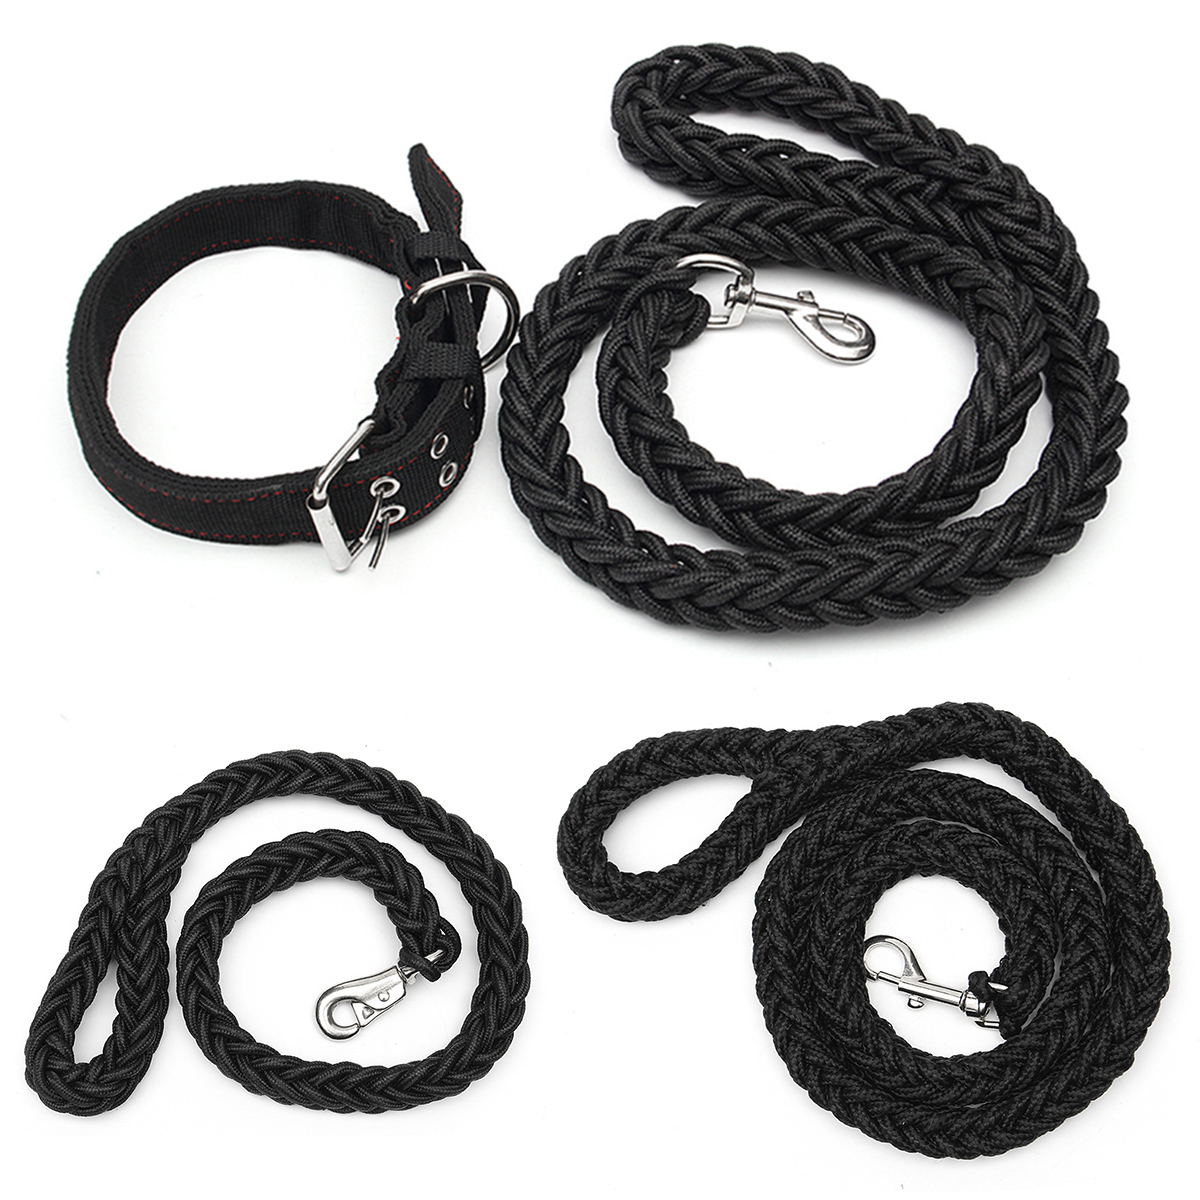 

120CM Pet Dog Durable Strong Nylon Braided Lead Leash Handle Rope With Collar